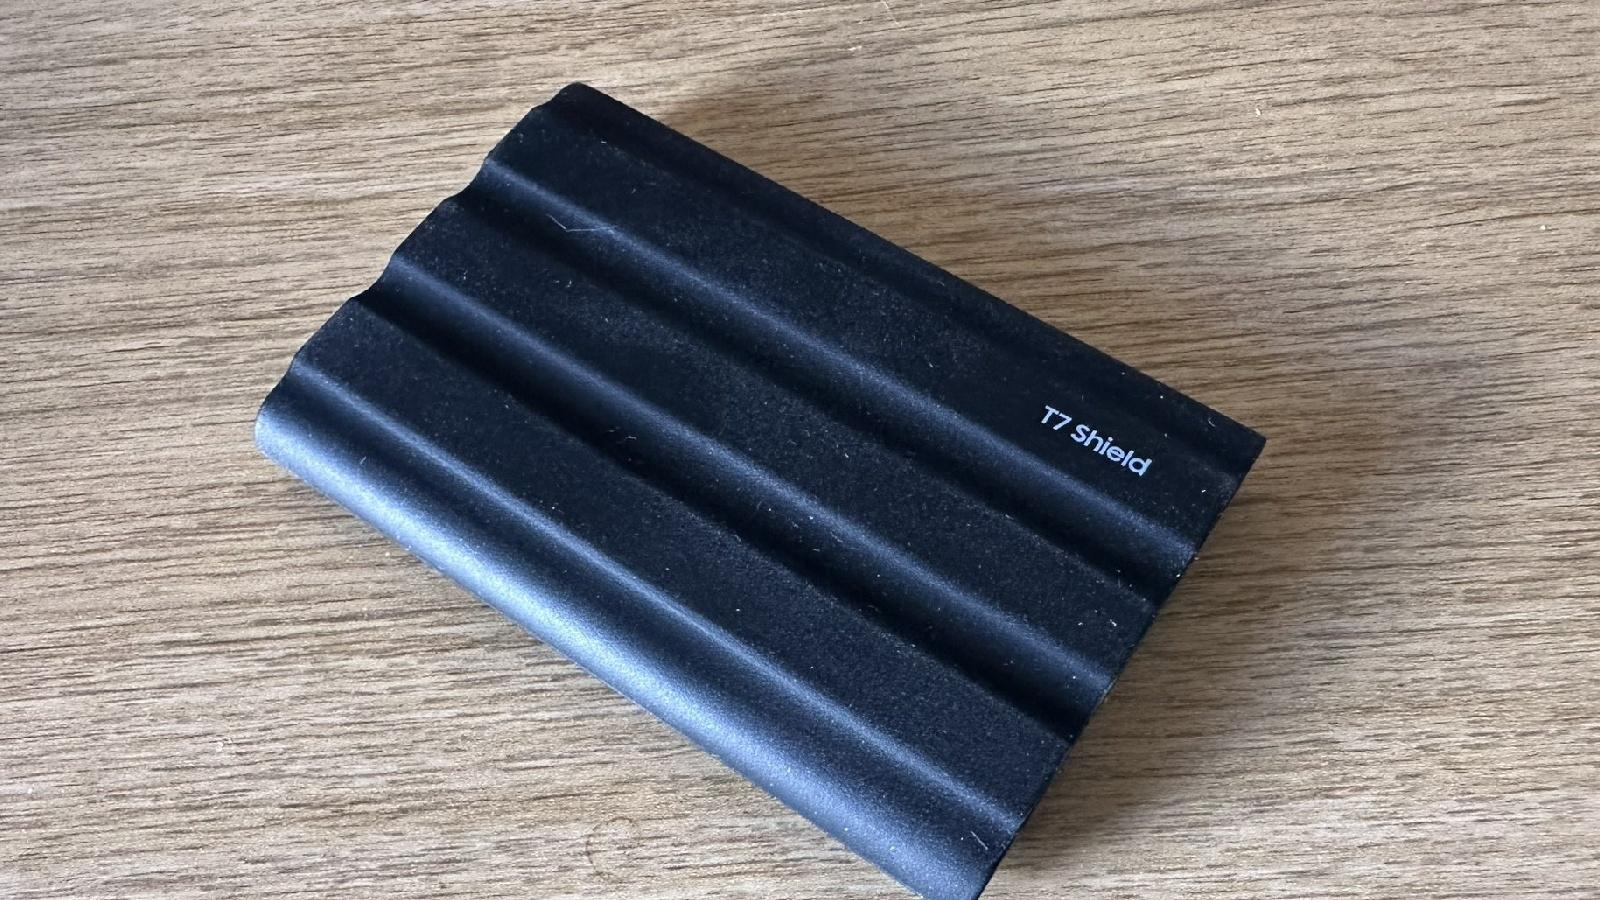 Samsung T7 Shield 4TB Review: Fast, Rugged Portable SSD Storage